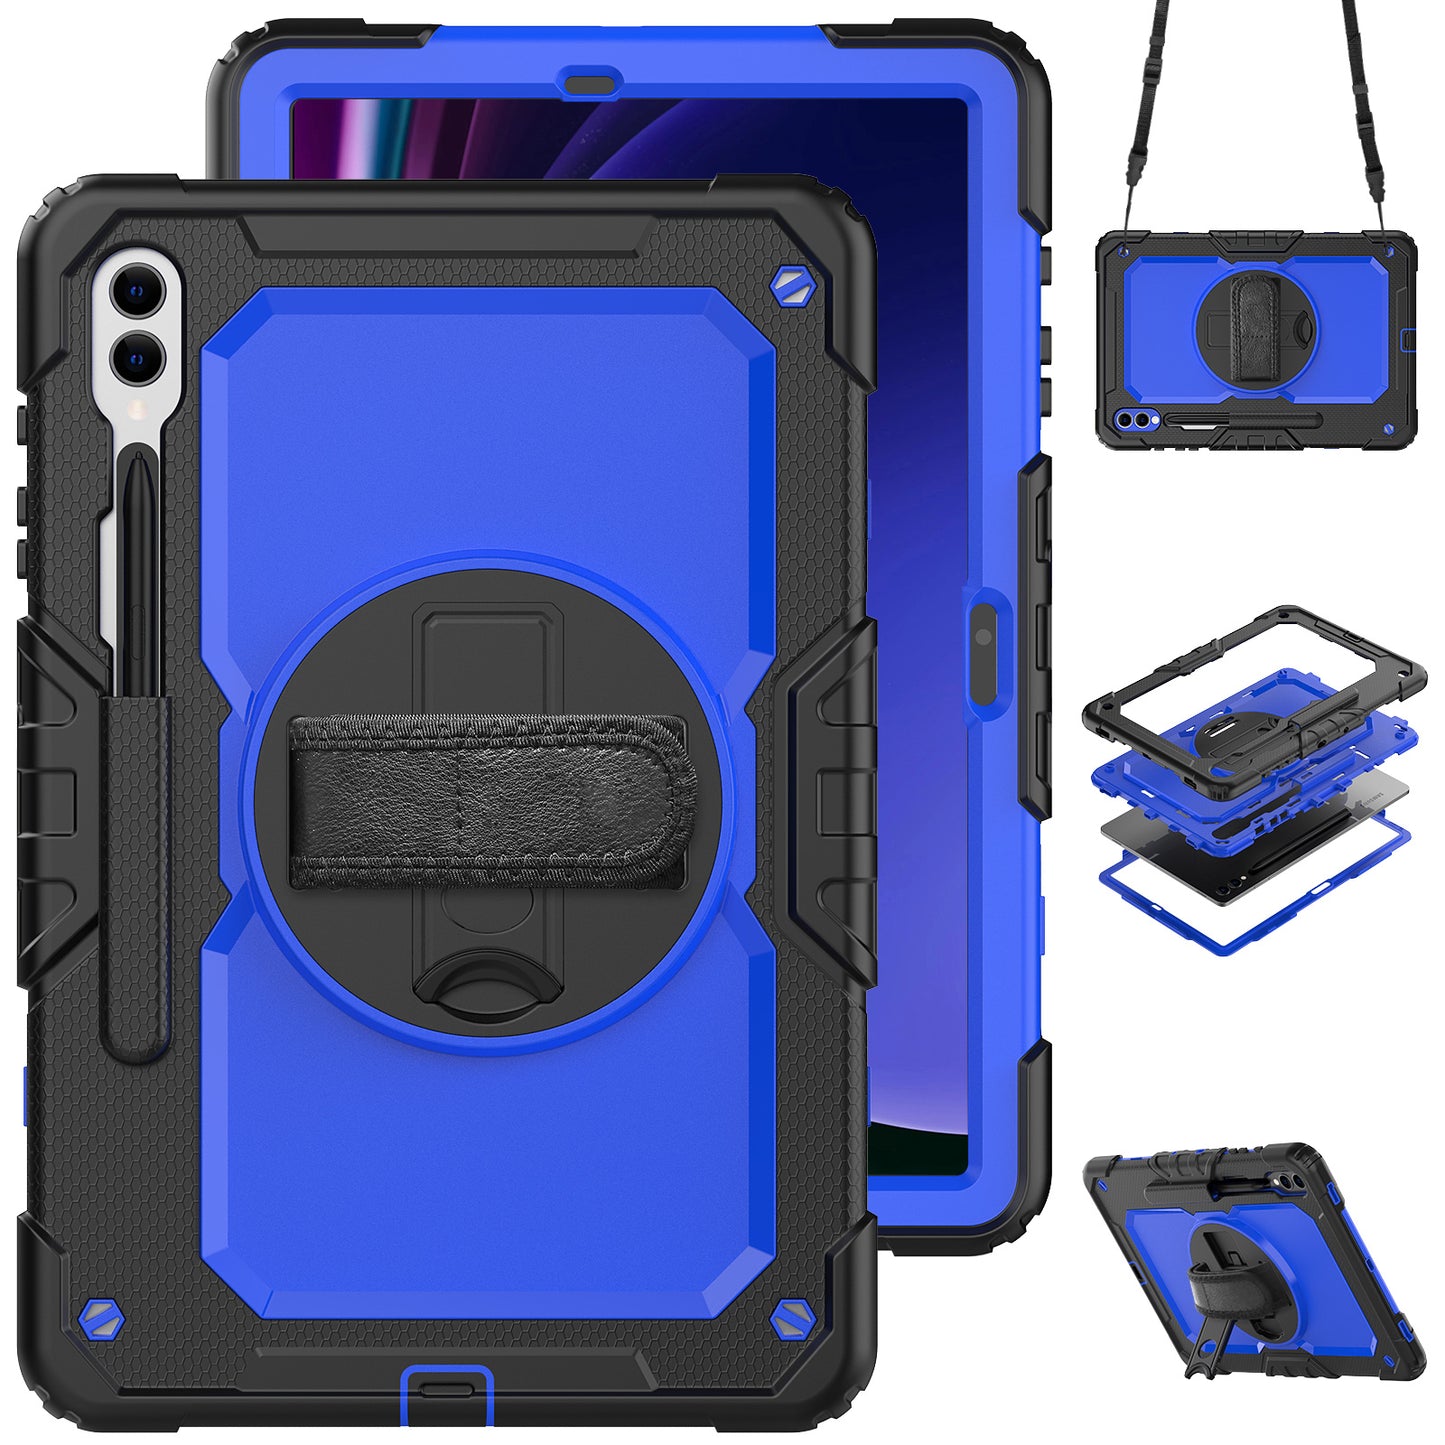 Tough Strap Galaxy Tab S9+ Shockproof Case Multi-functional Built-in Screen Protector